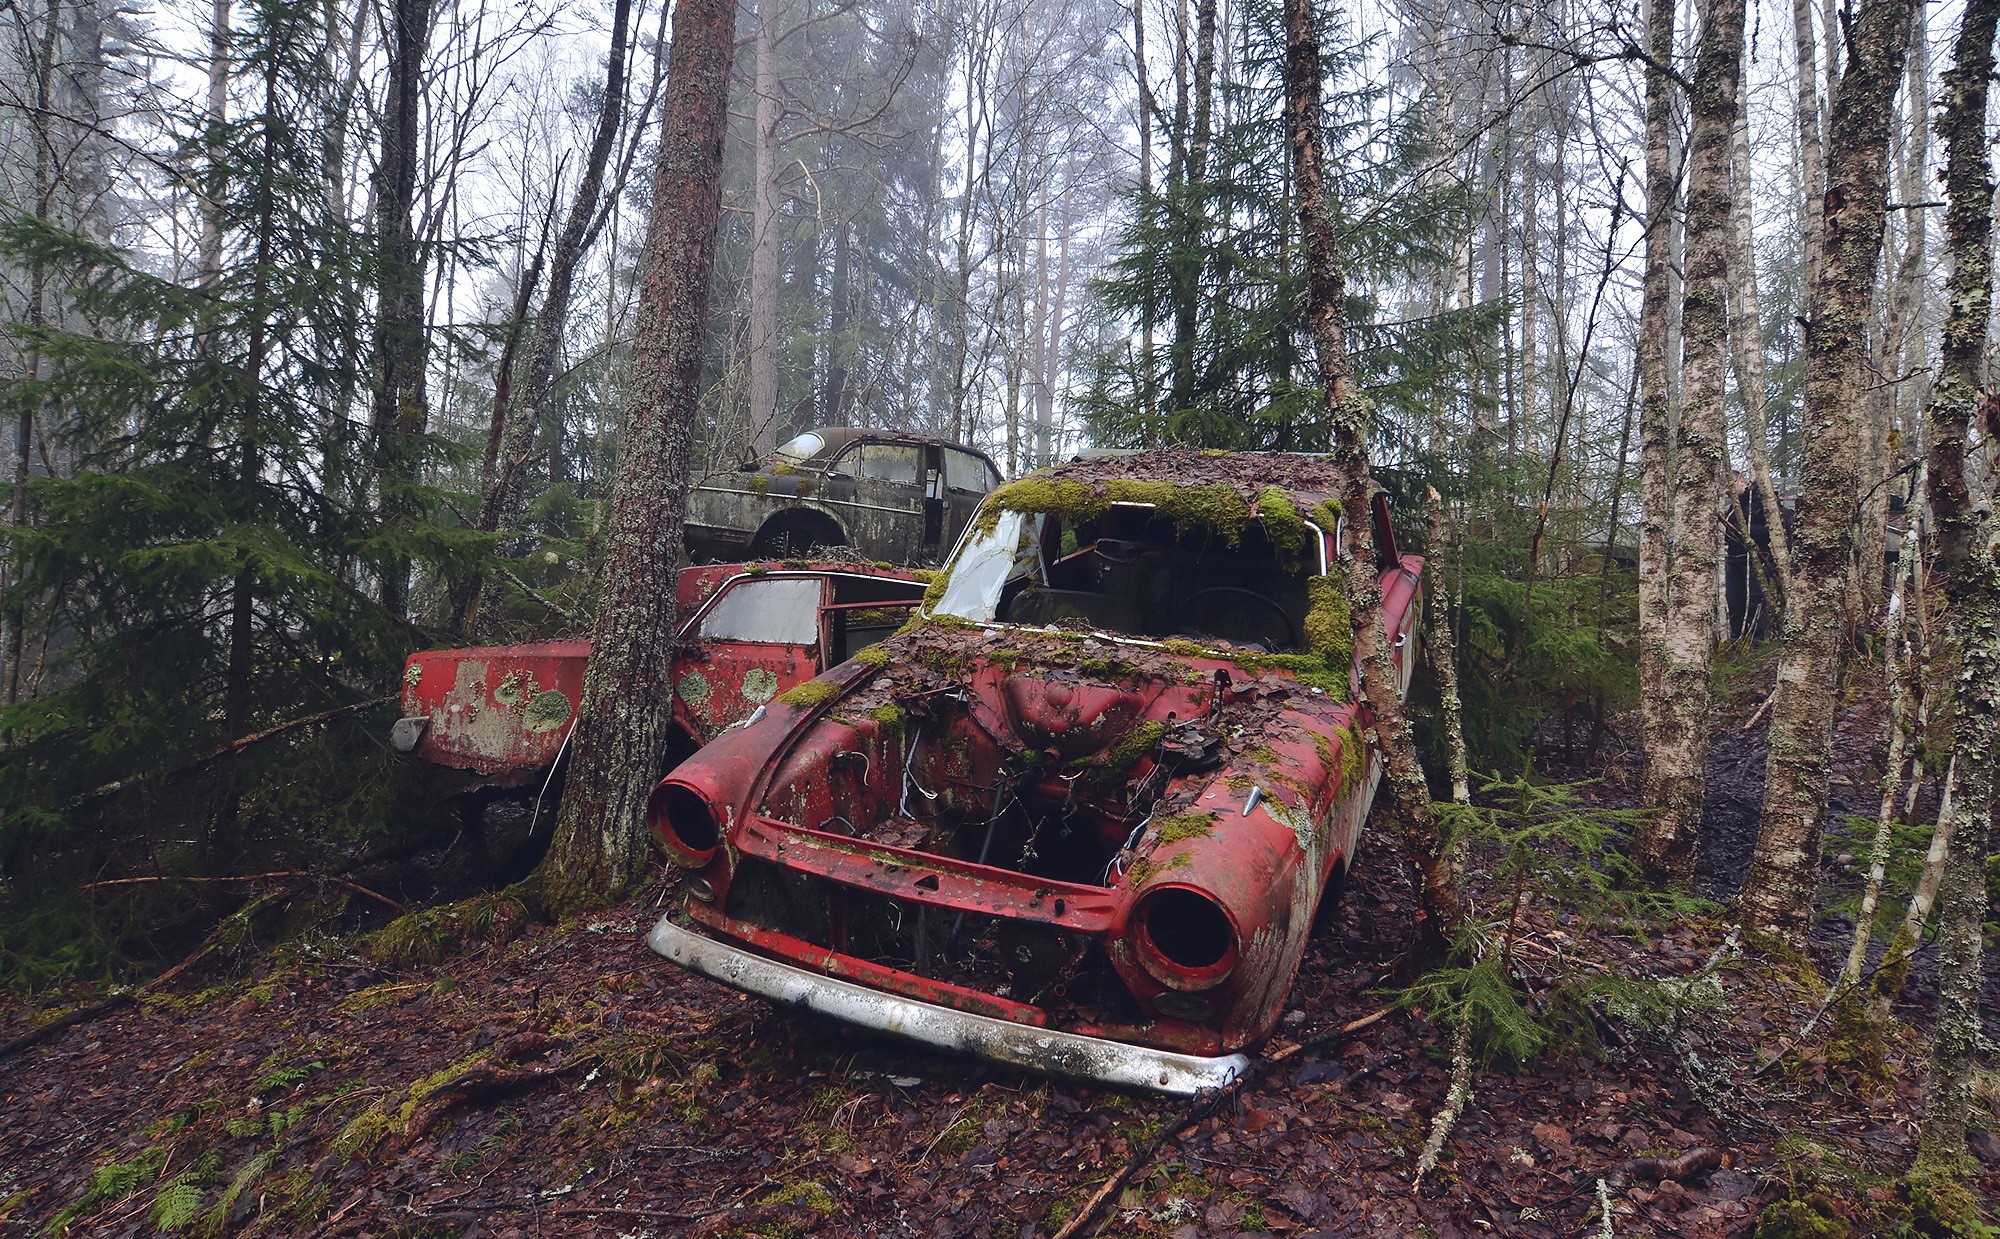 General 2000x1239 wreck ruins car vehicle outdoors trees